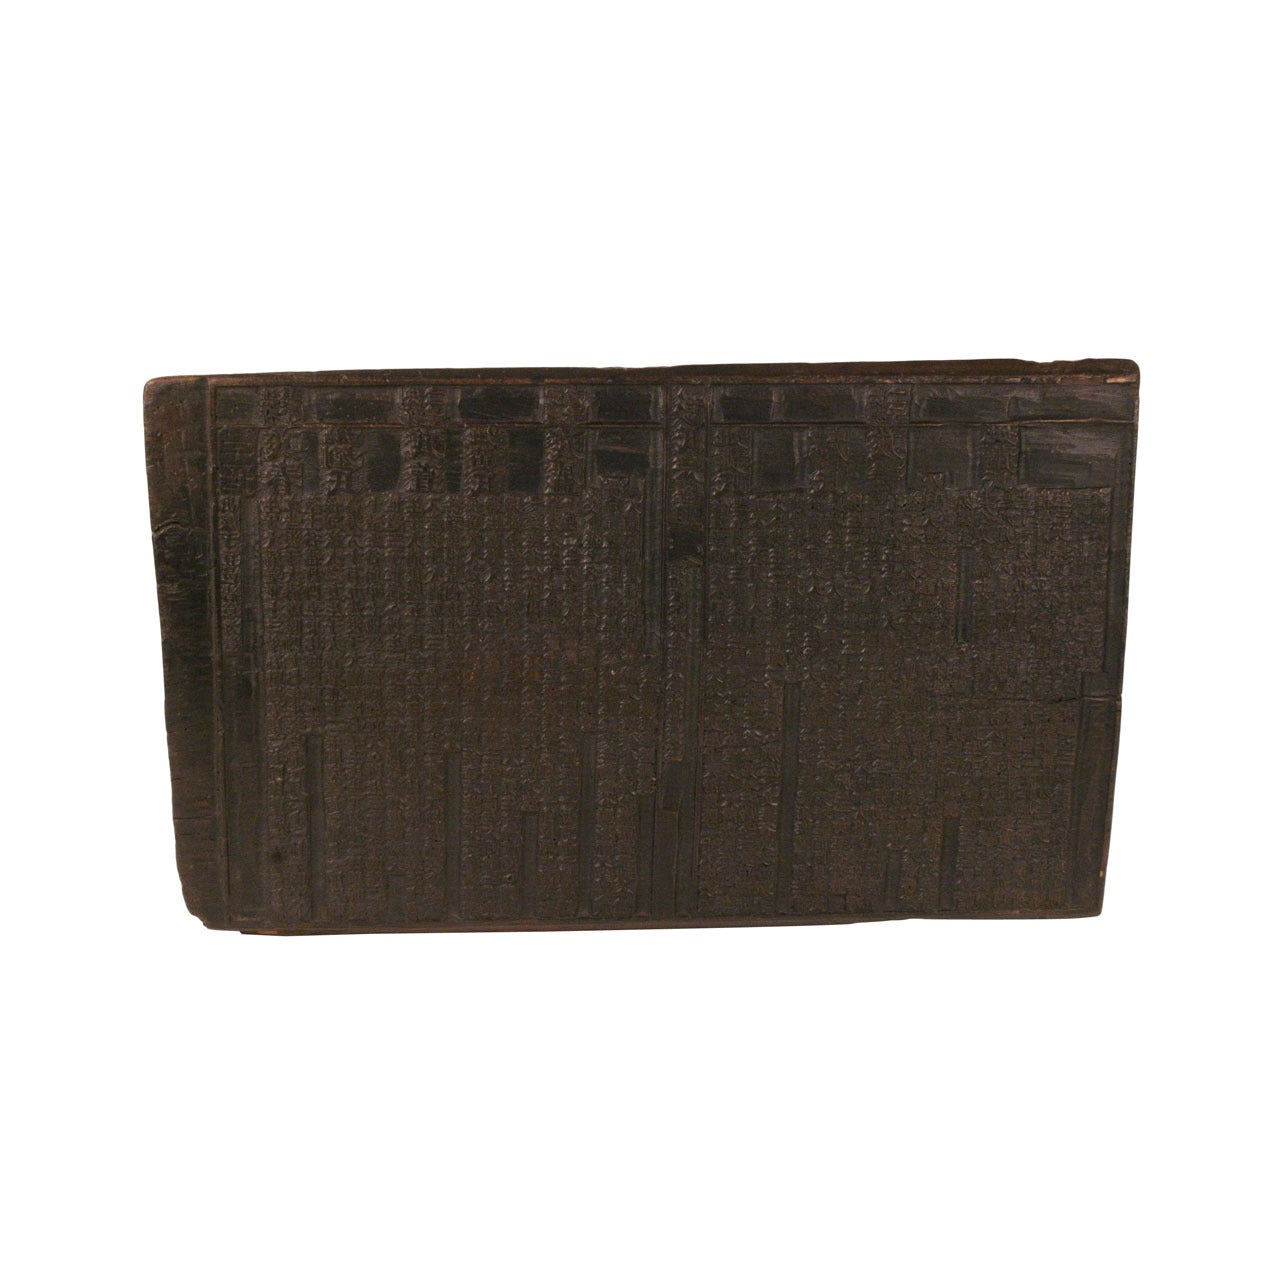 Carved Wooden Block for Printing Books For Sale